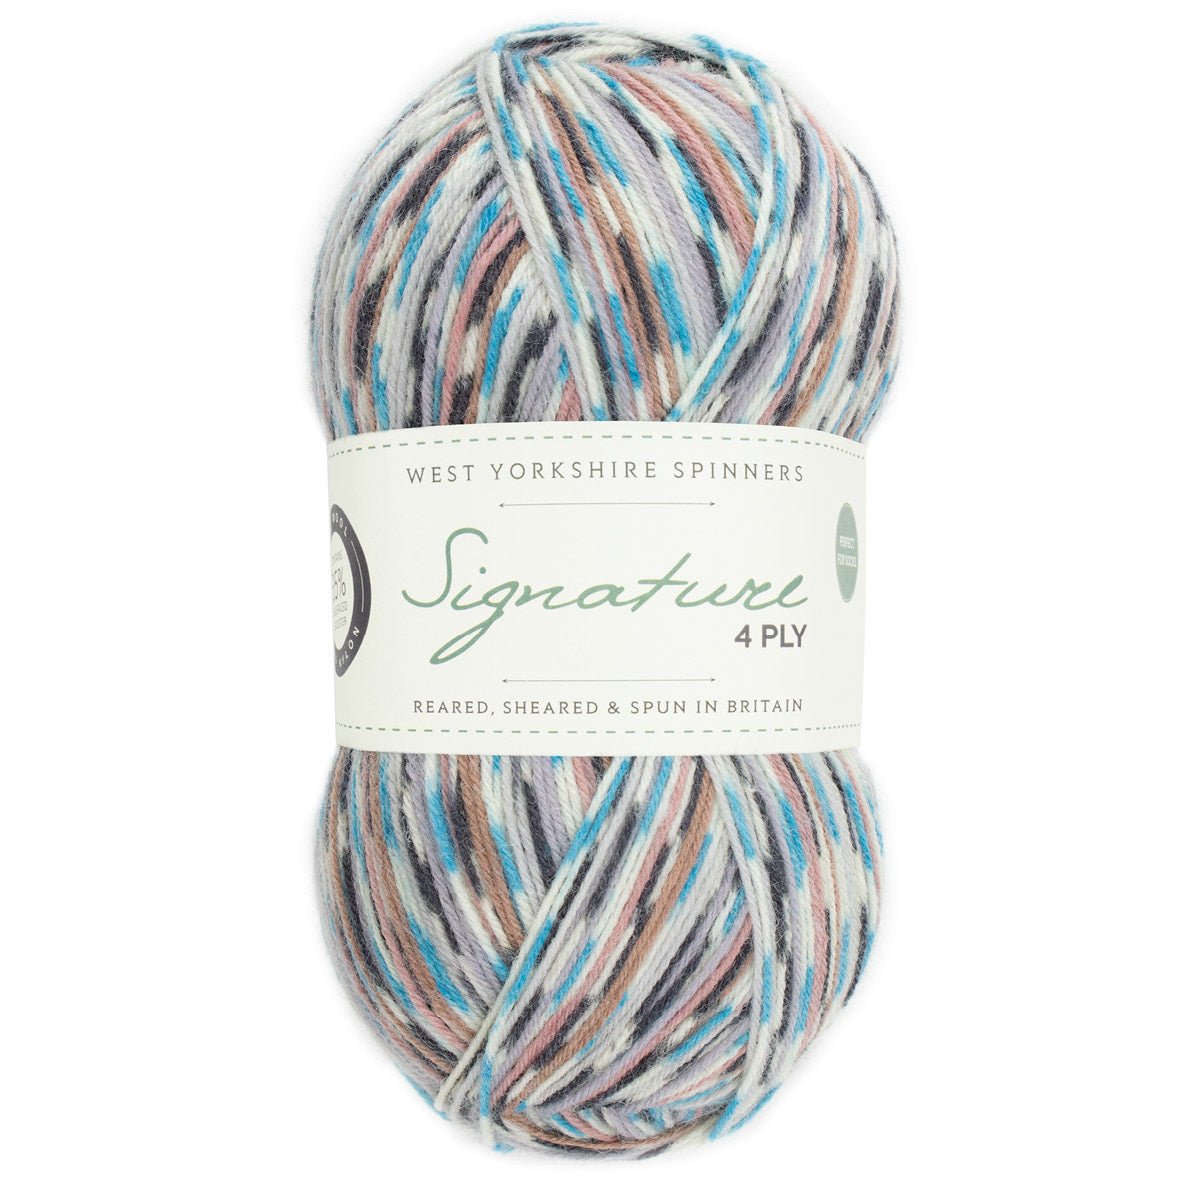 SIGNATURE 4PLY - COUNTRY BIRDS 1167-Jay - West Yorkshire Spinners